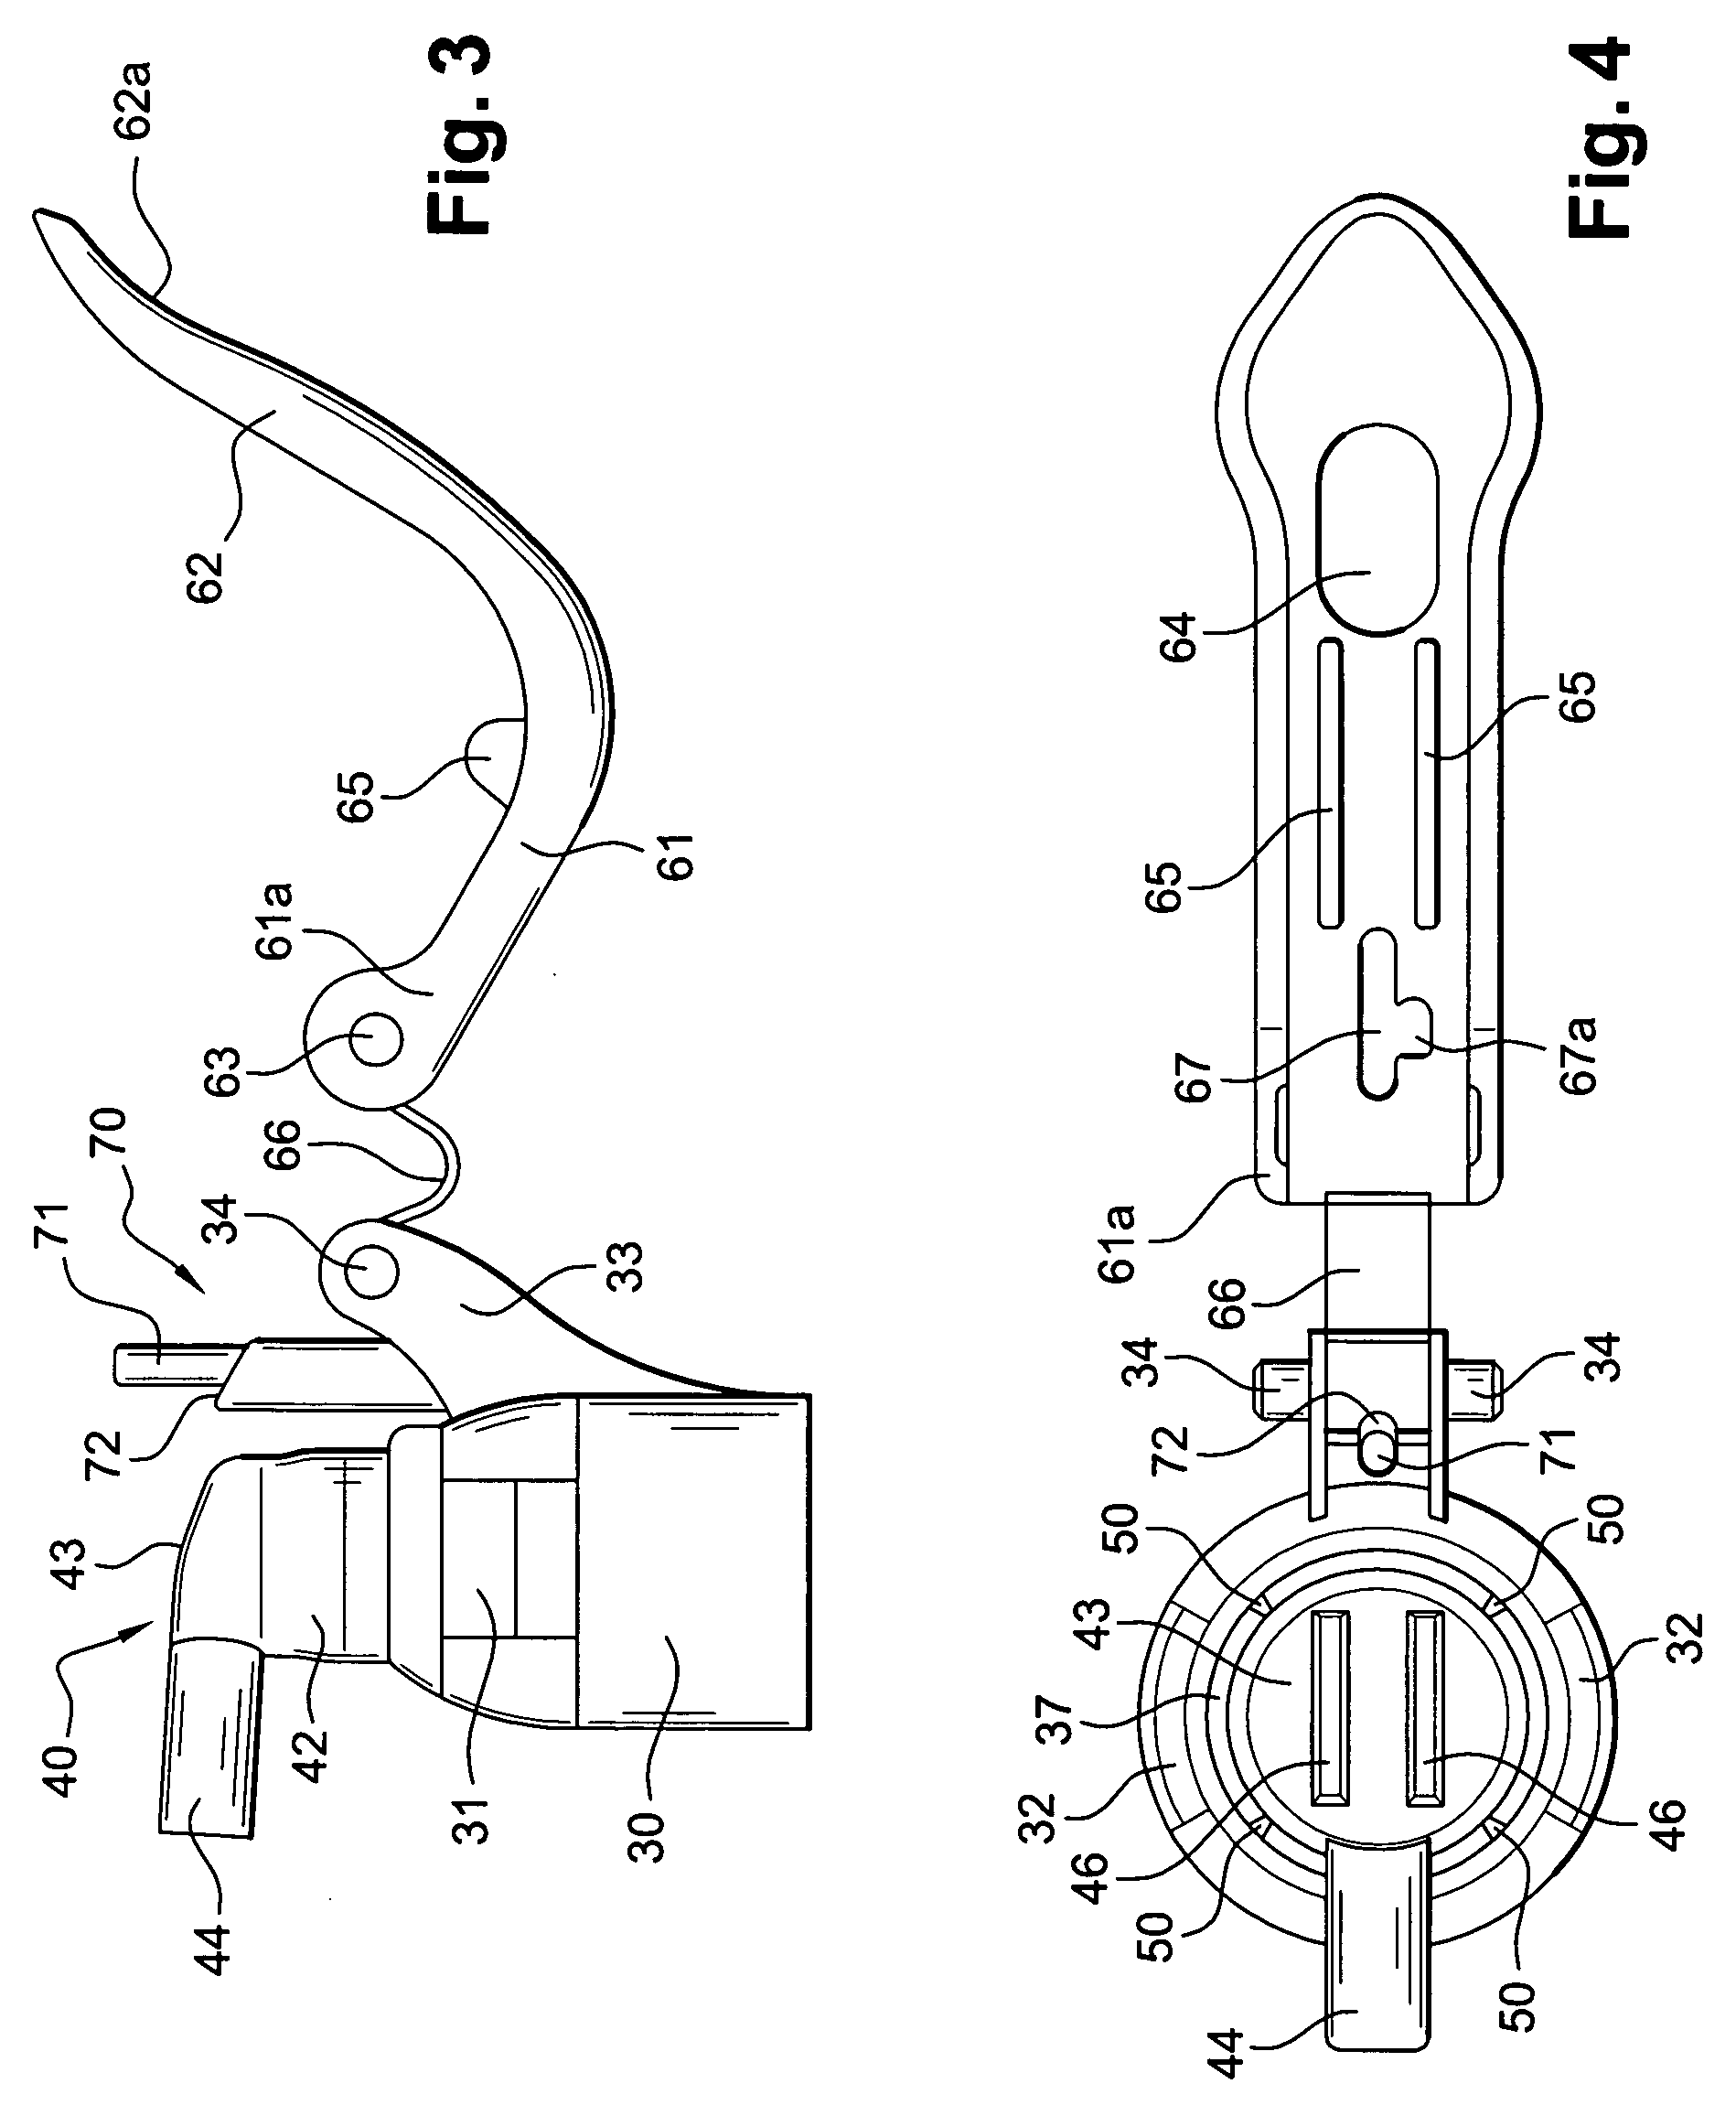 Device for packaging and dispensing a product